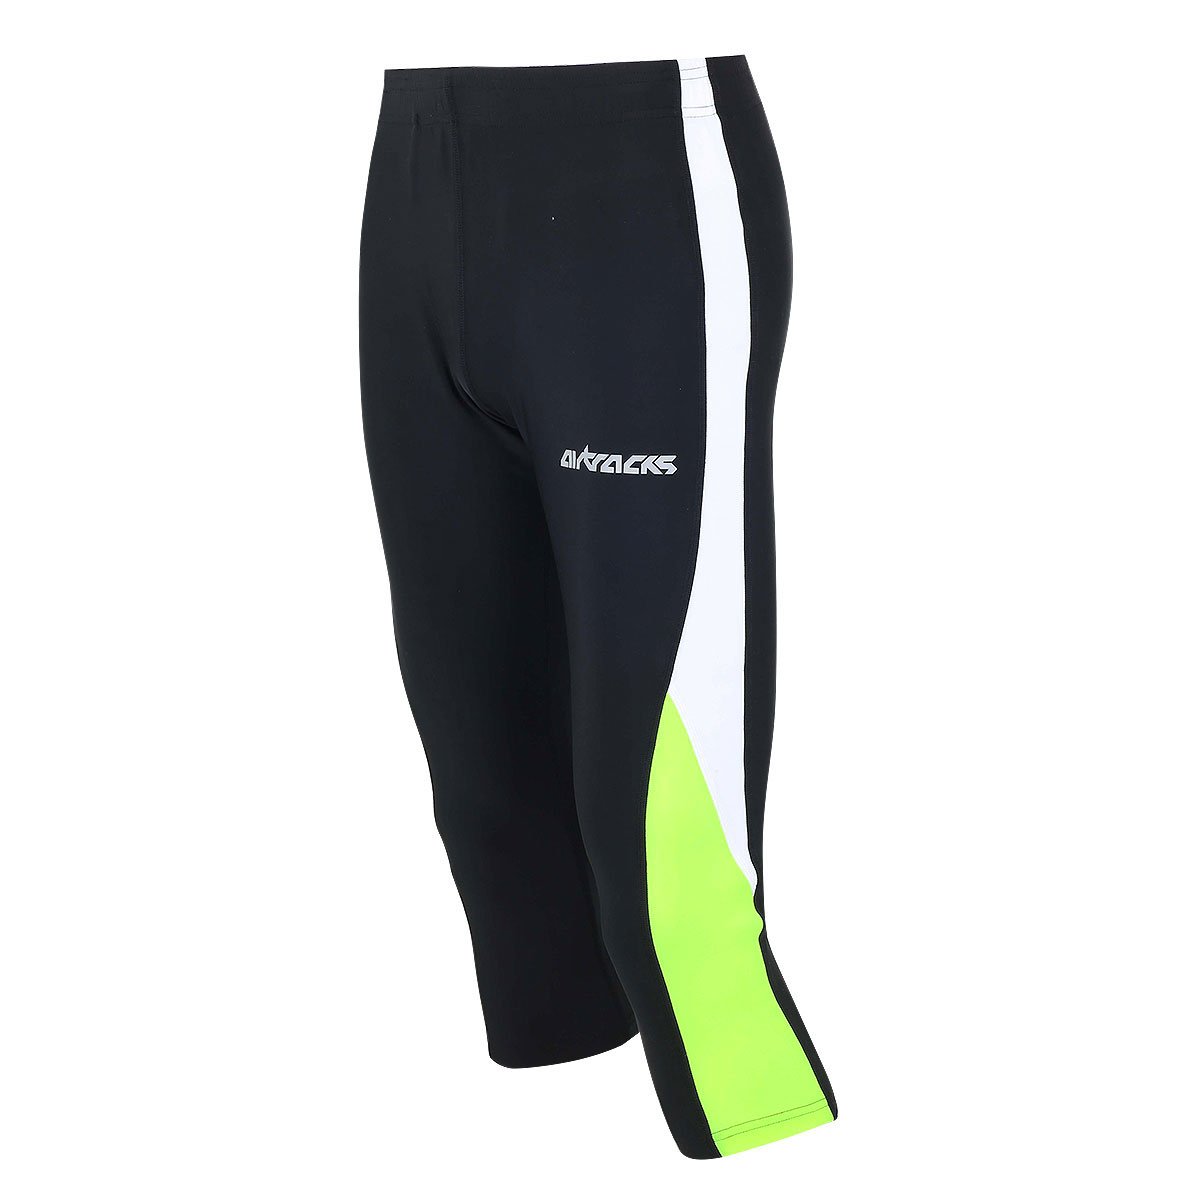 Airtracks FUNKTIONS Laufhose 3/4 LANG/Running Hose/Tight/Kompression - schwarz-neon - XS